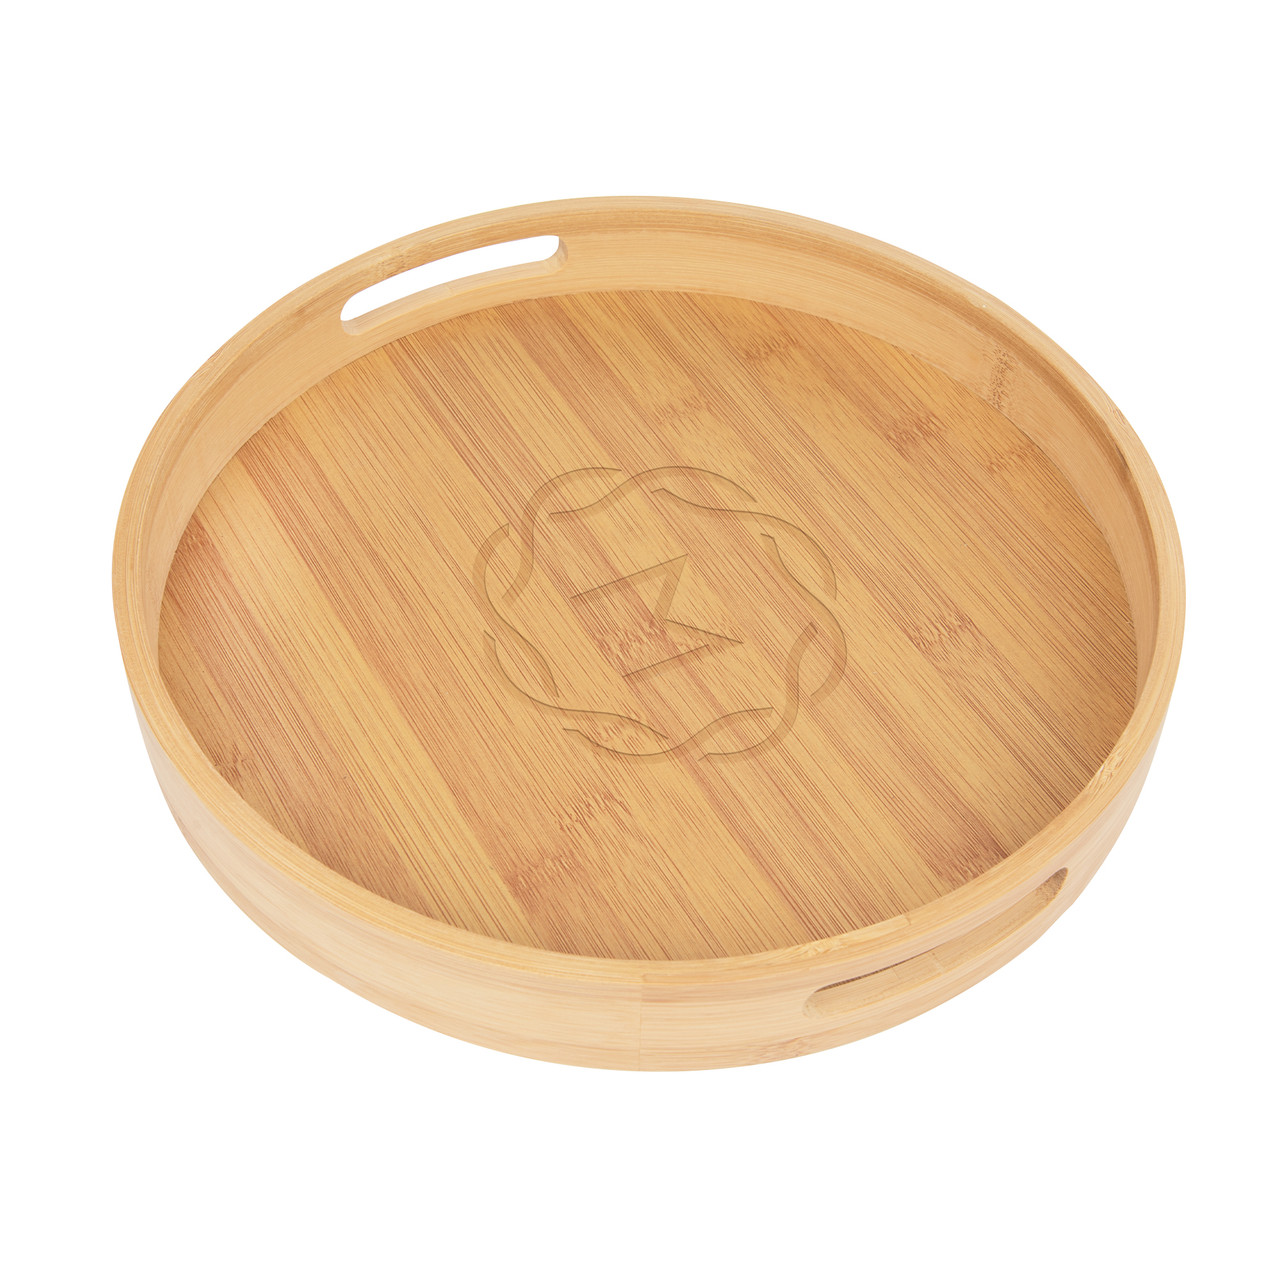 Custom Bamboo Serving Tray With Handles 75038